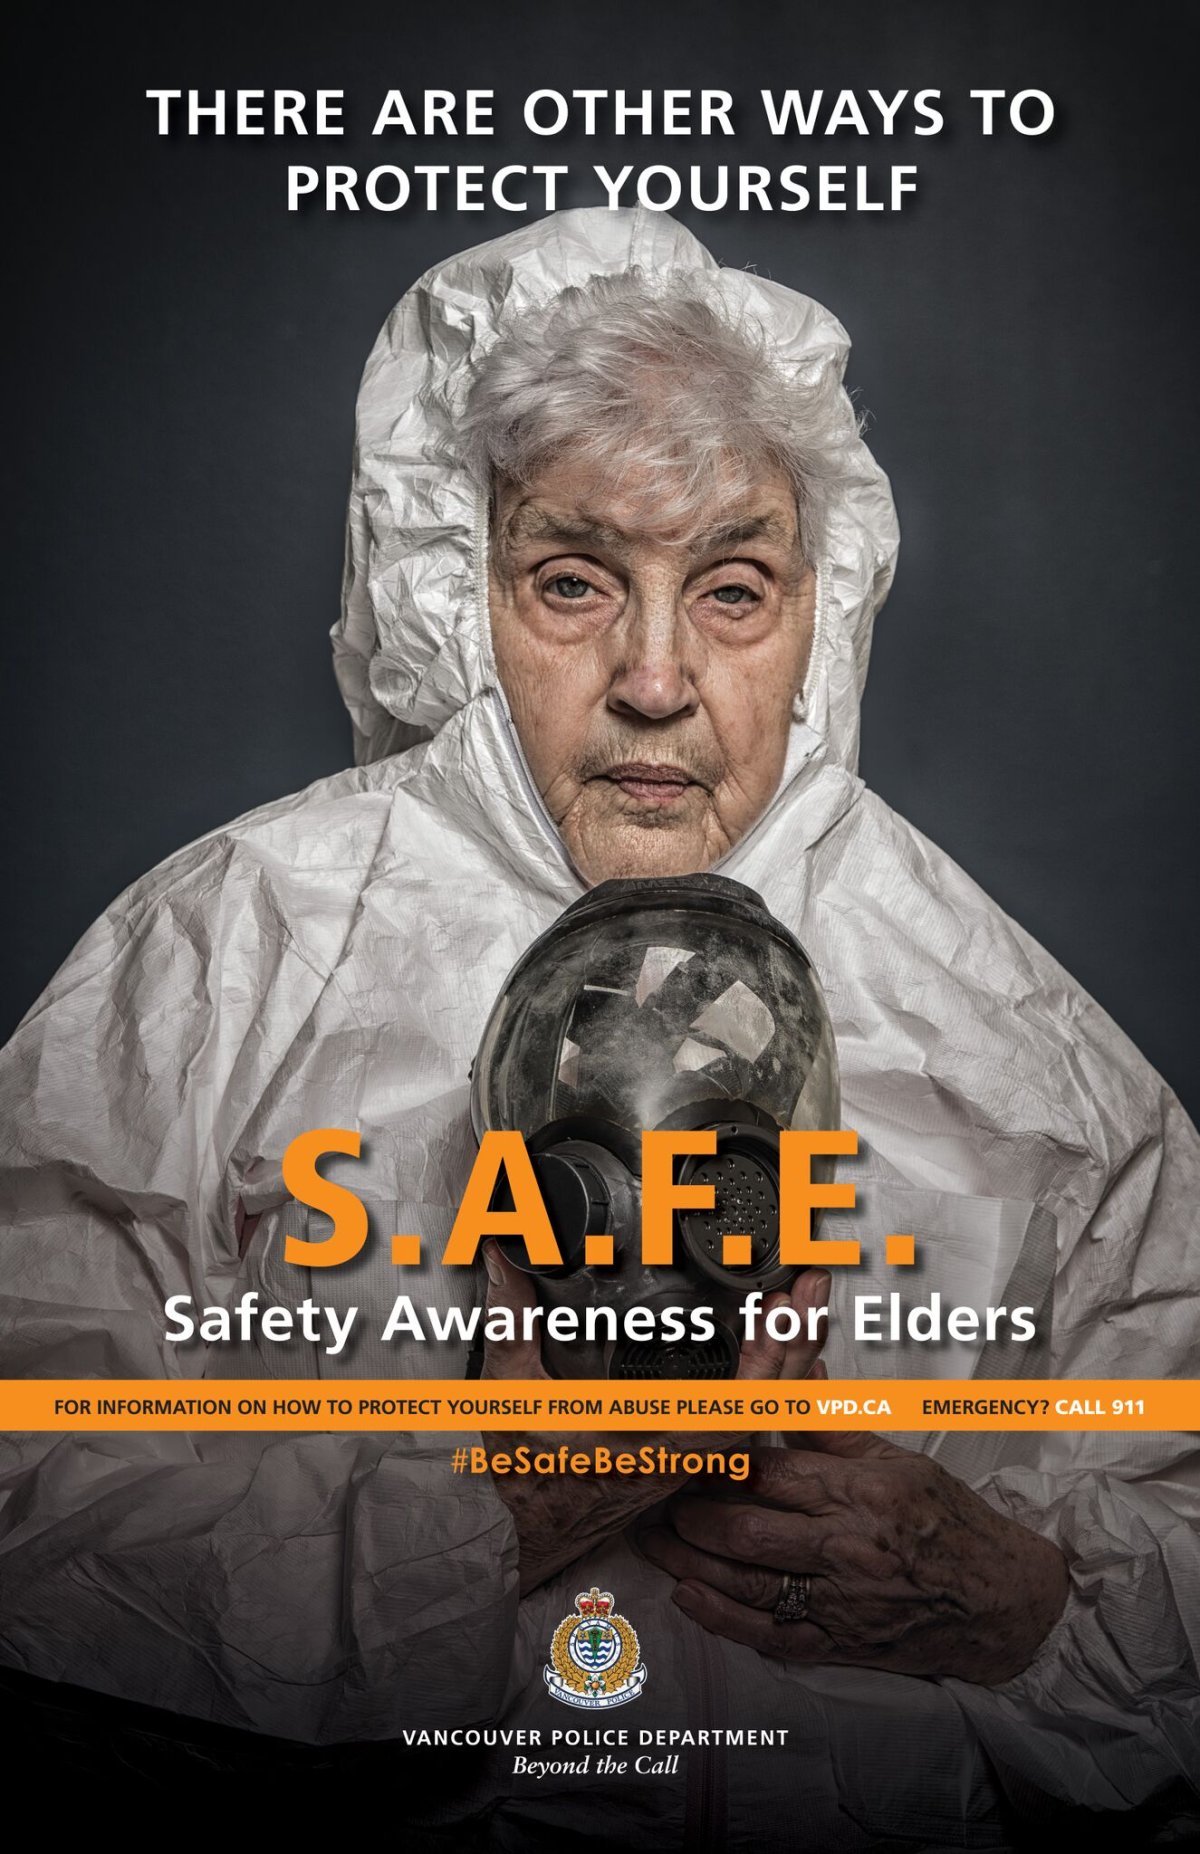 VPD sounding the alarm about elder abuse - image